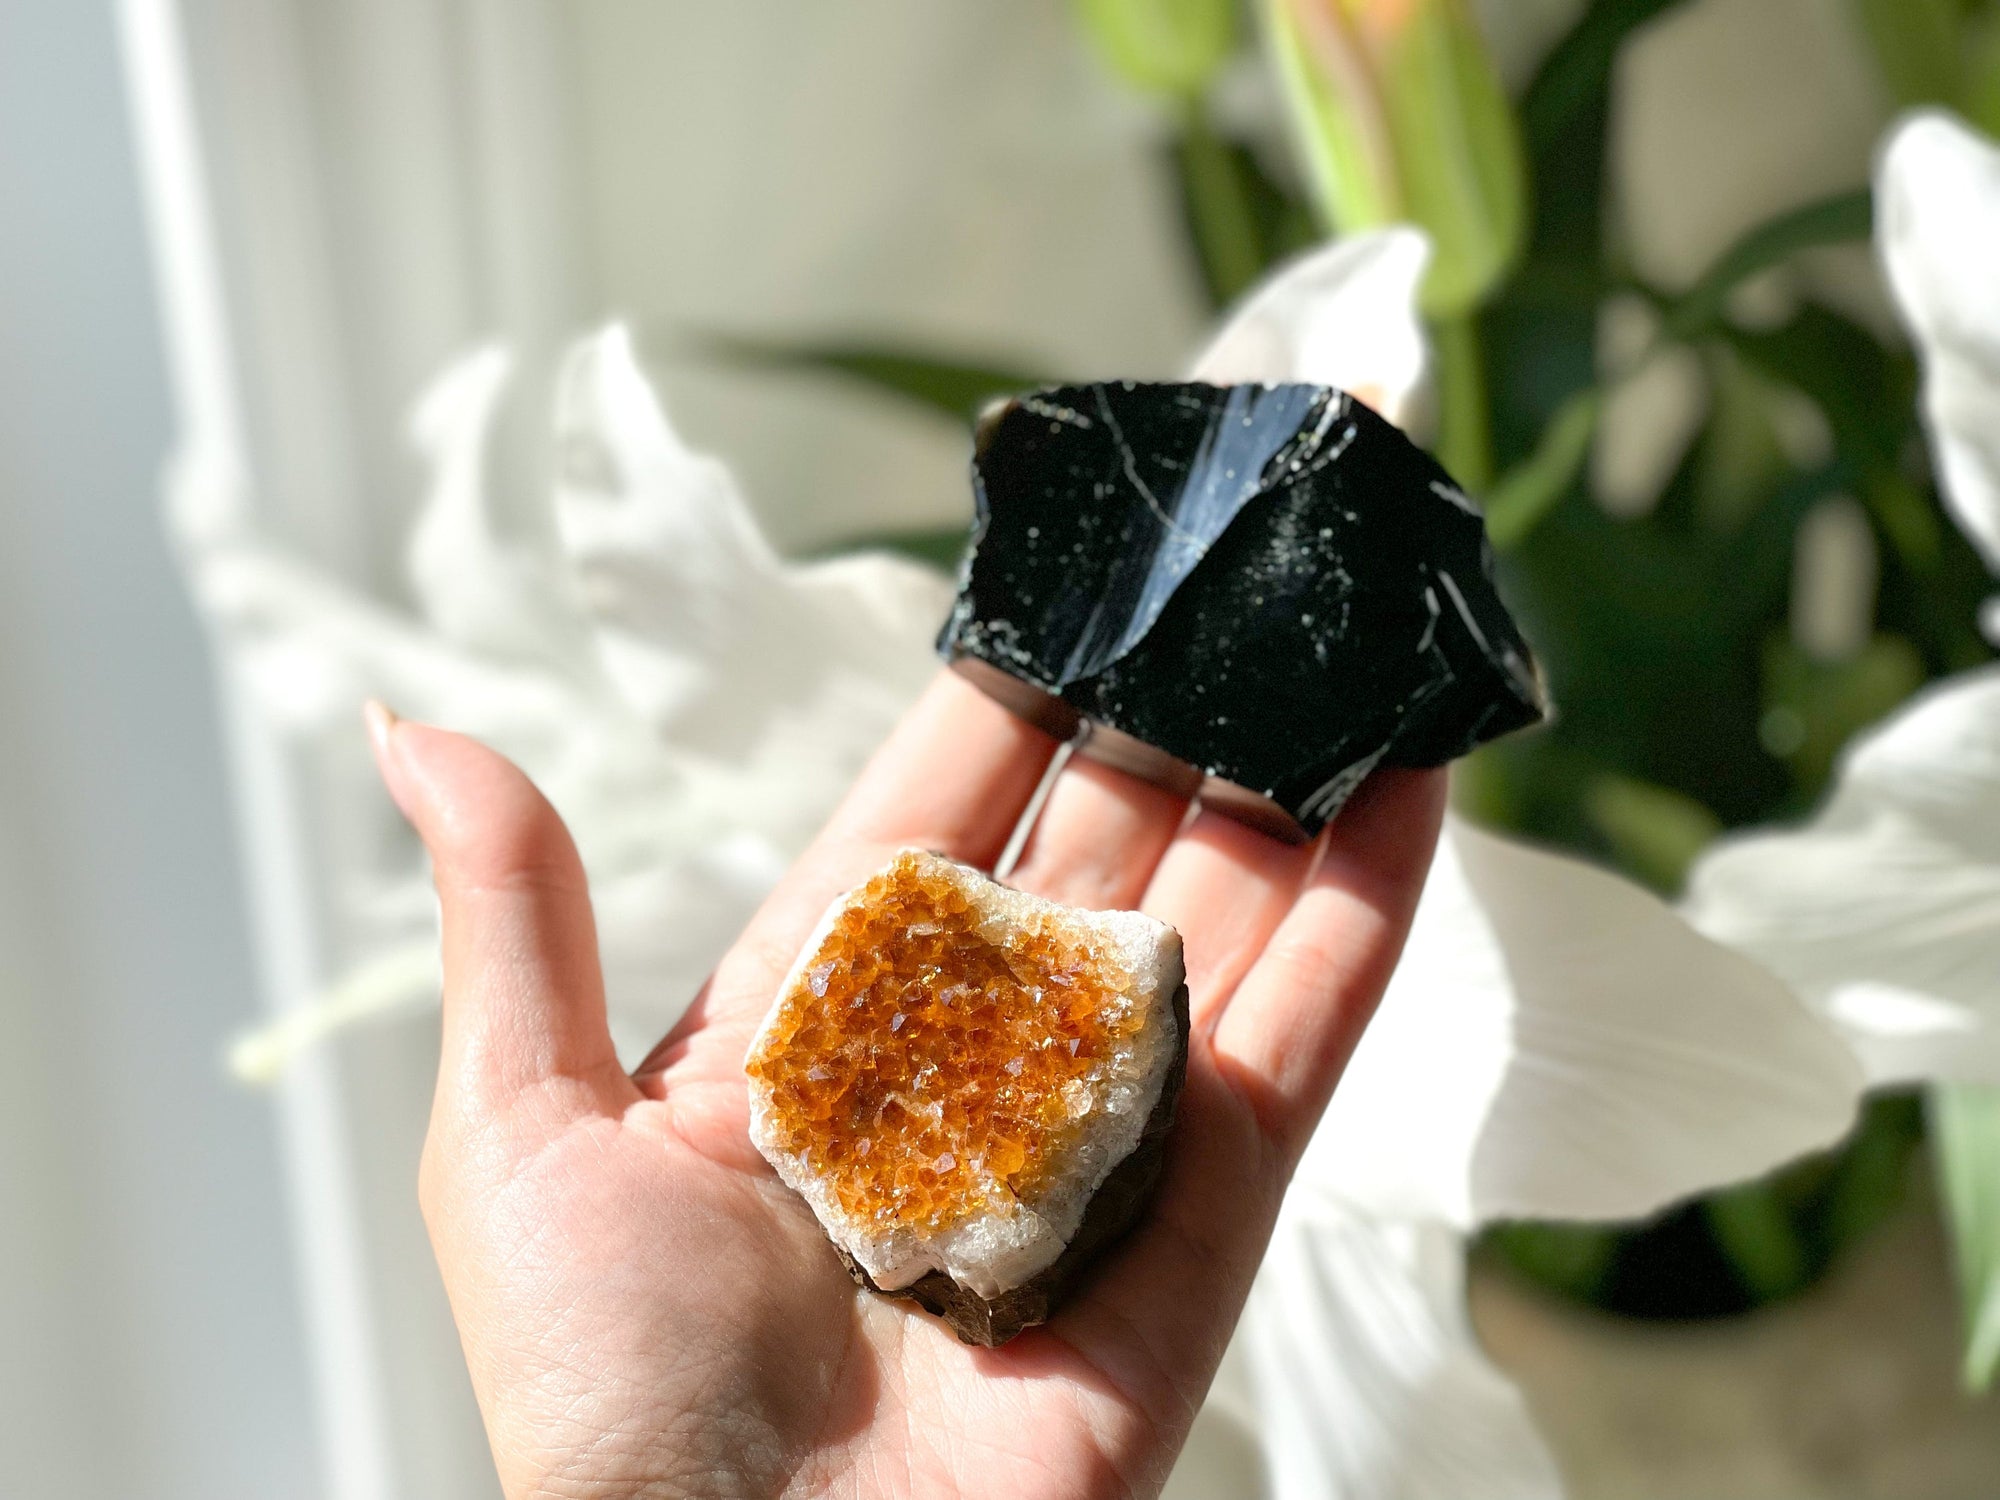 Raw Citrine Cluster & Black Obsidian Crystal Set - Manifestation and Grounding Power Duo for Prosperity and Protection"